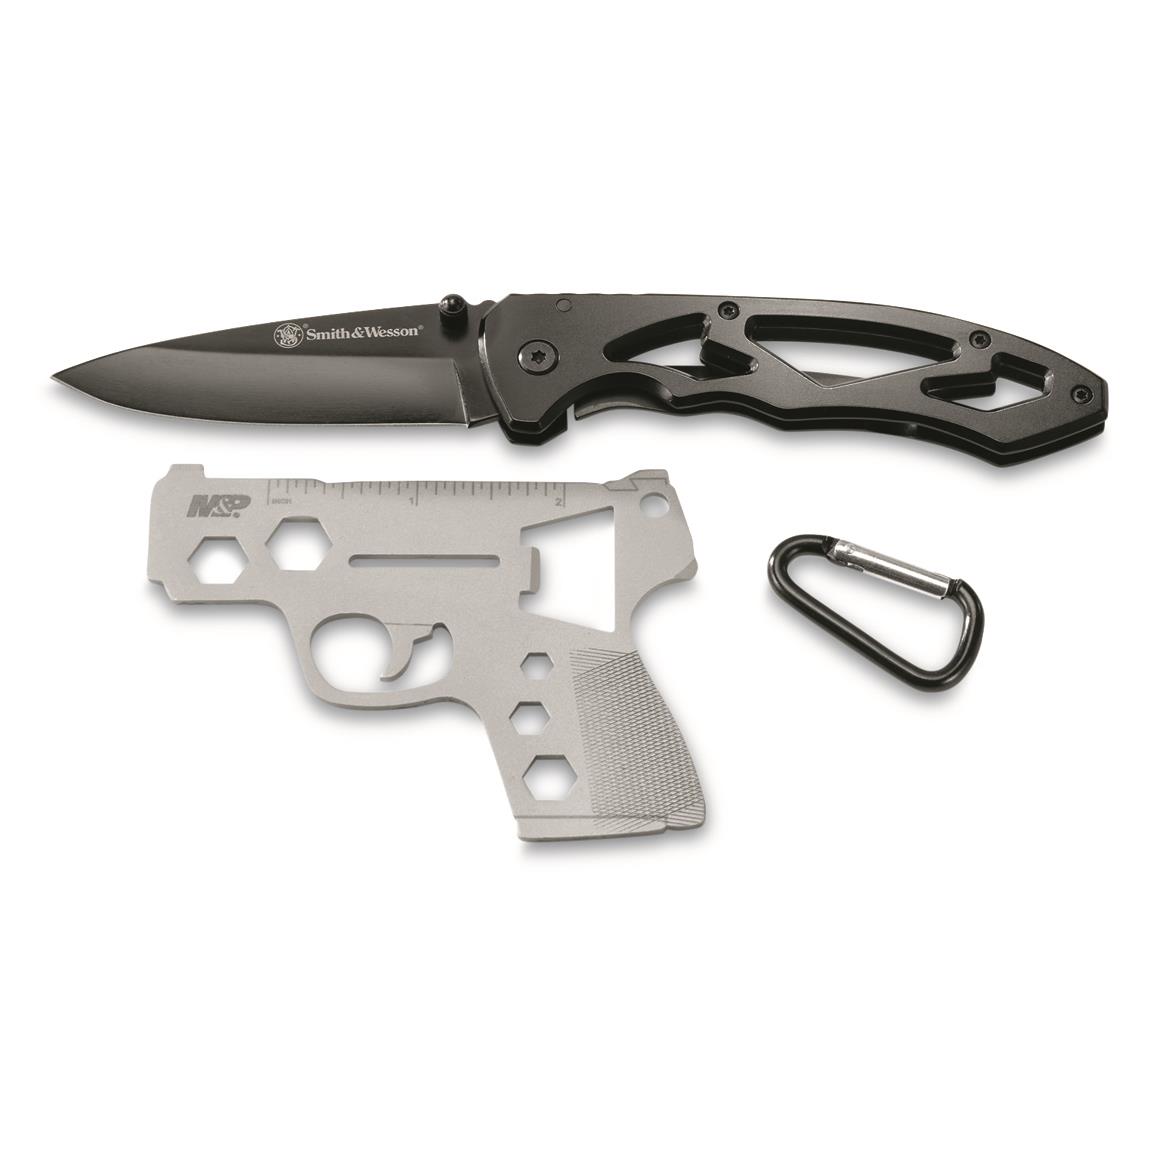 Smith & Wesson Folder Knife and Tool Combo